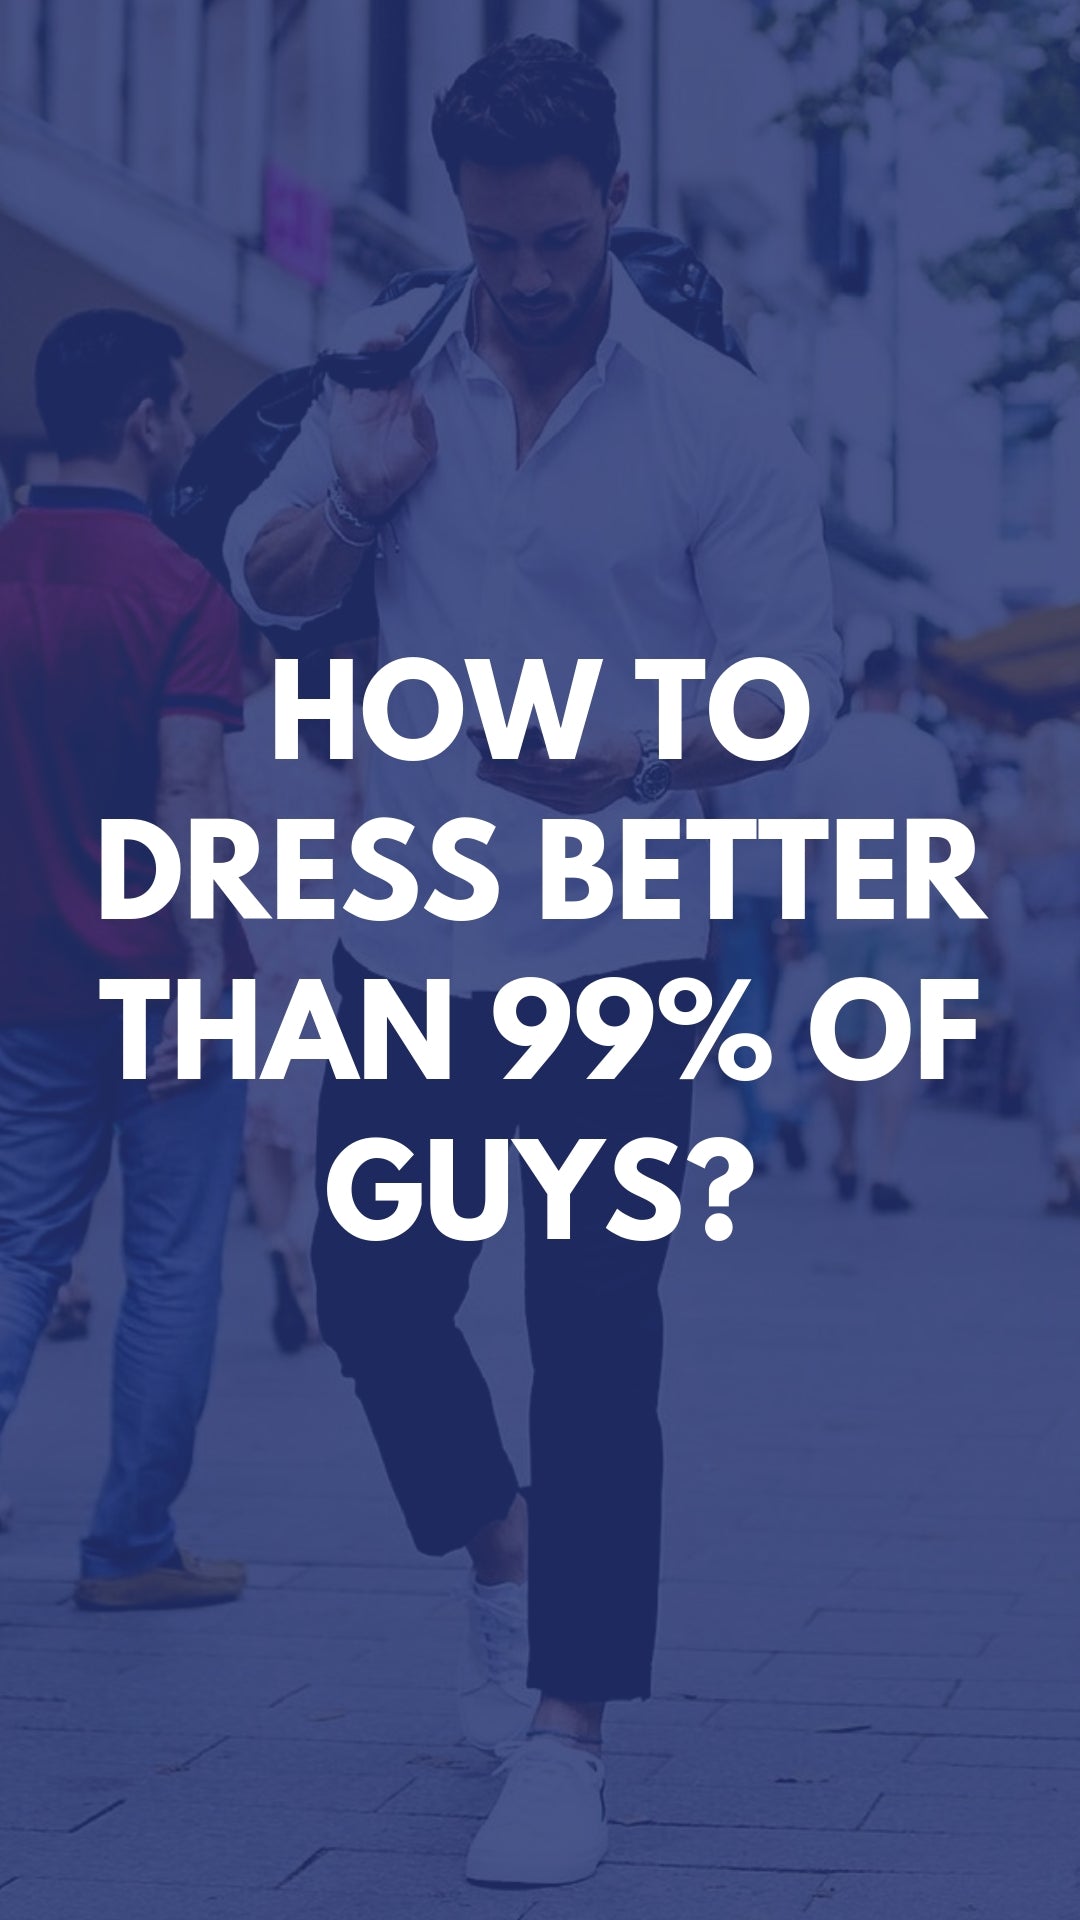 How To Dress Better Than 99% Of Guys? Here's a Secret #fashiontips